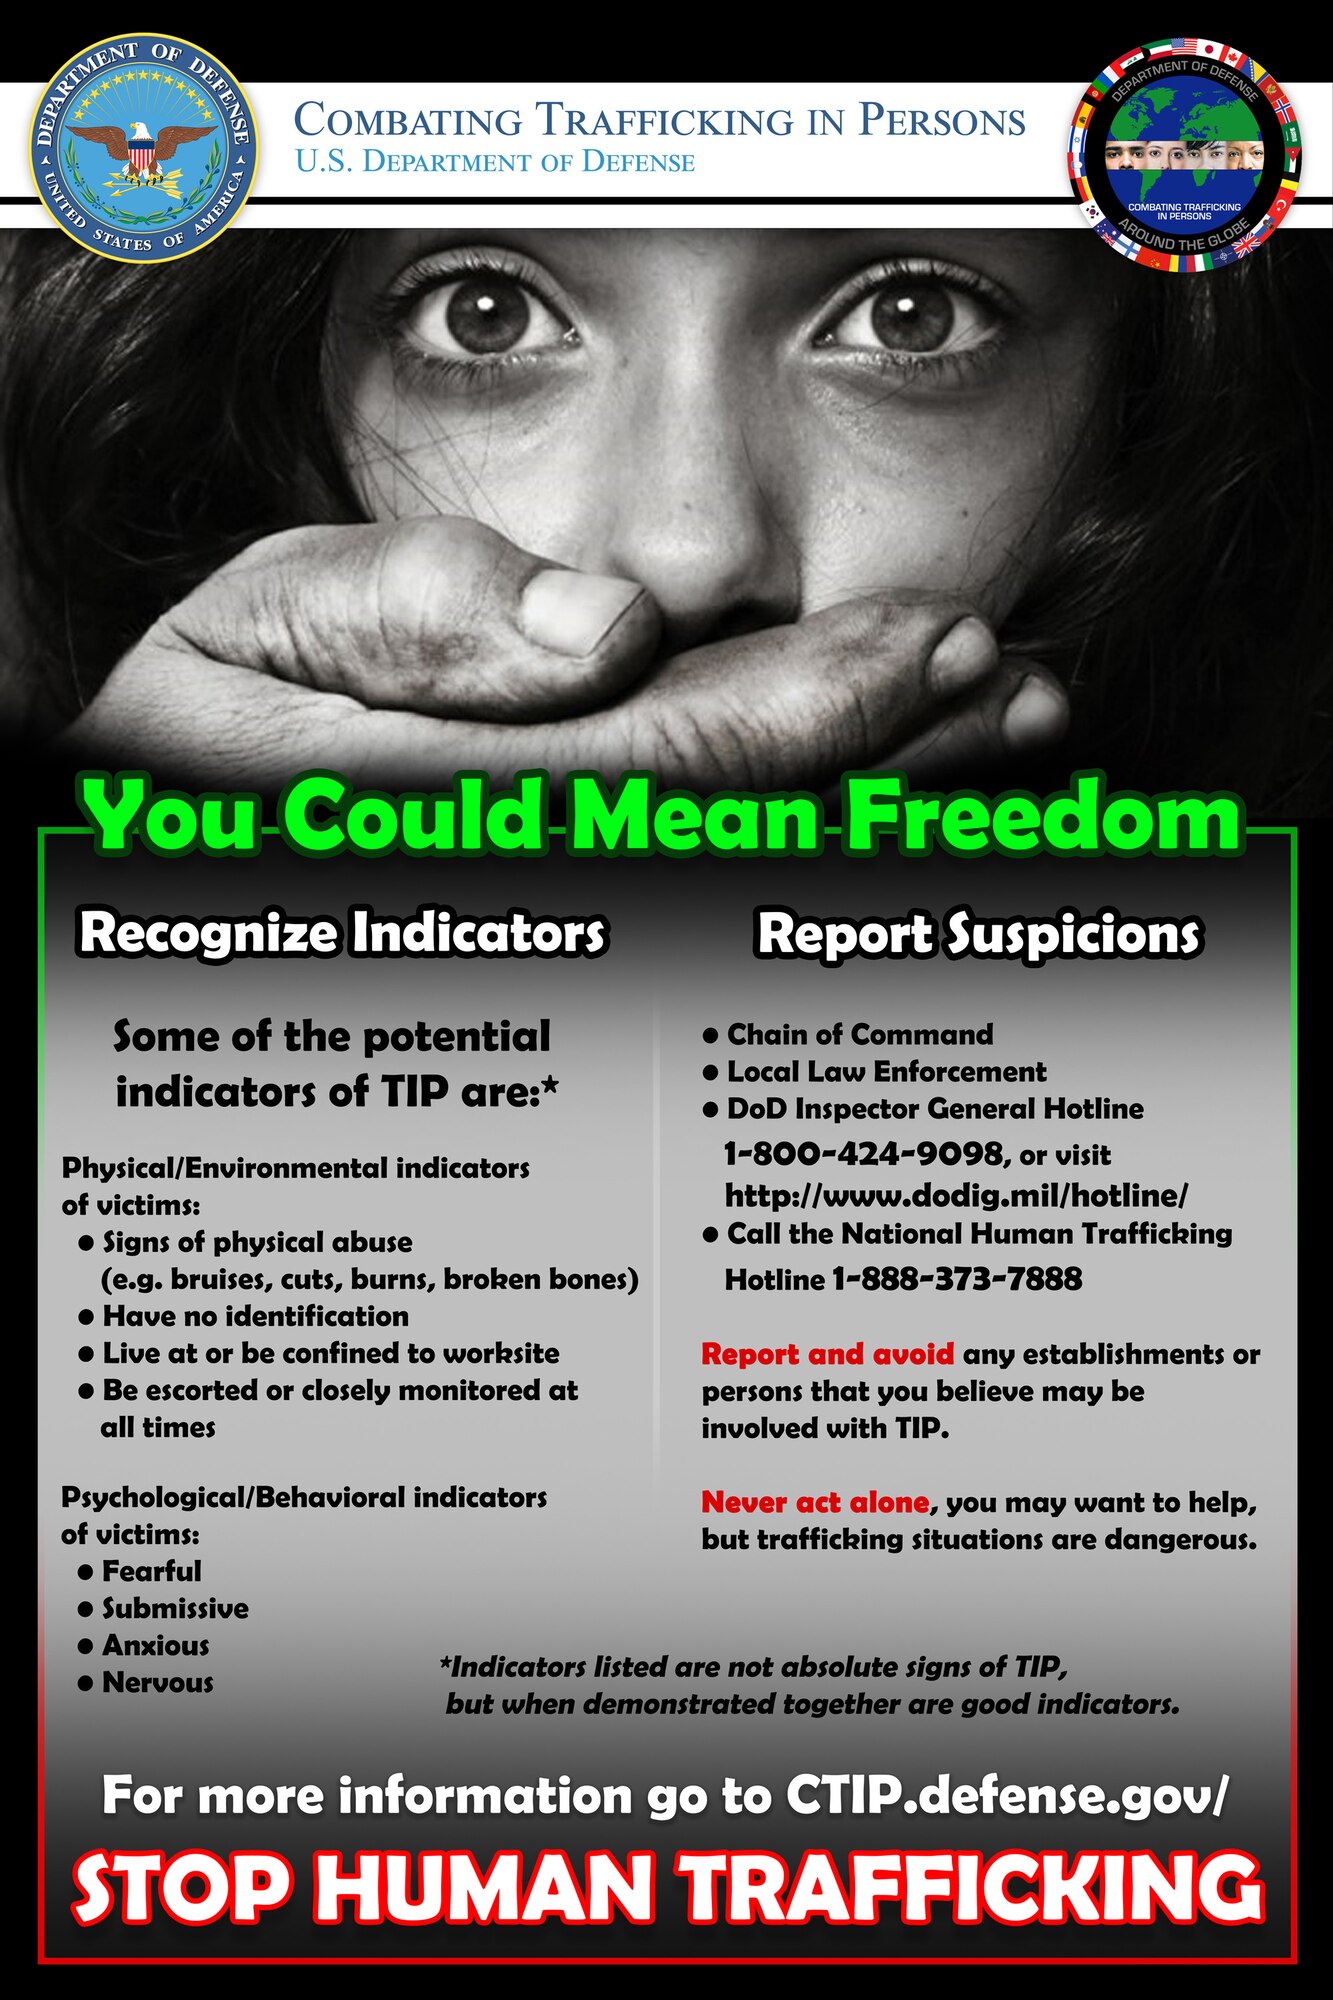 Combating Trafficking in Persons poster. (Courtesy of Department of Defense)